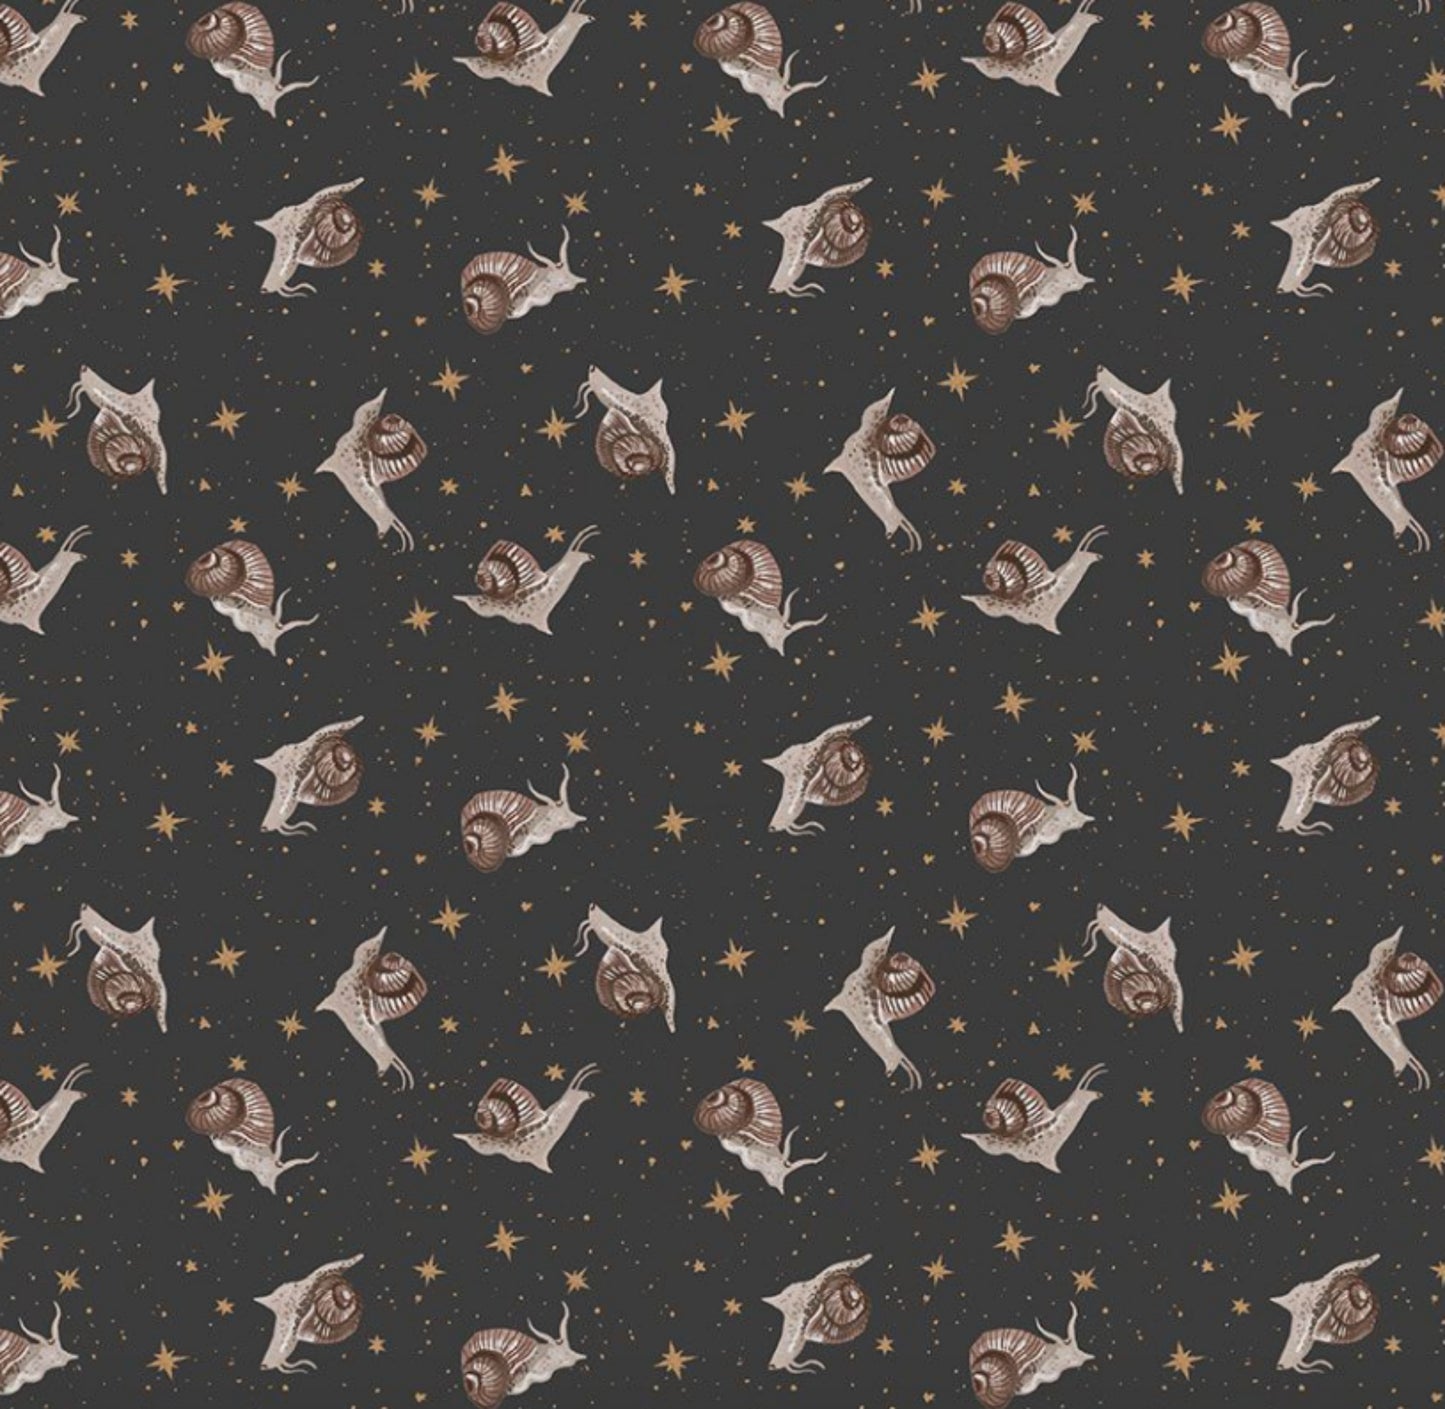 Snails from the Goblincore Collection by Rae Ritchie for Dear Stella Fabrics